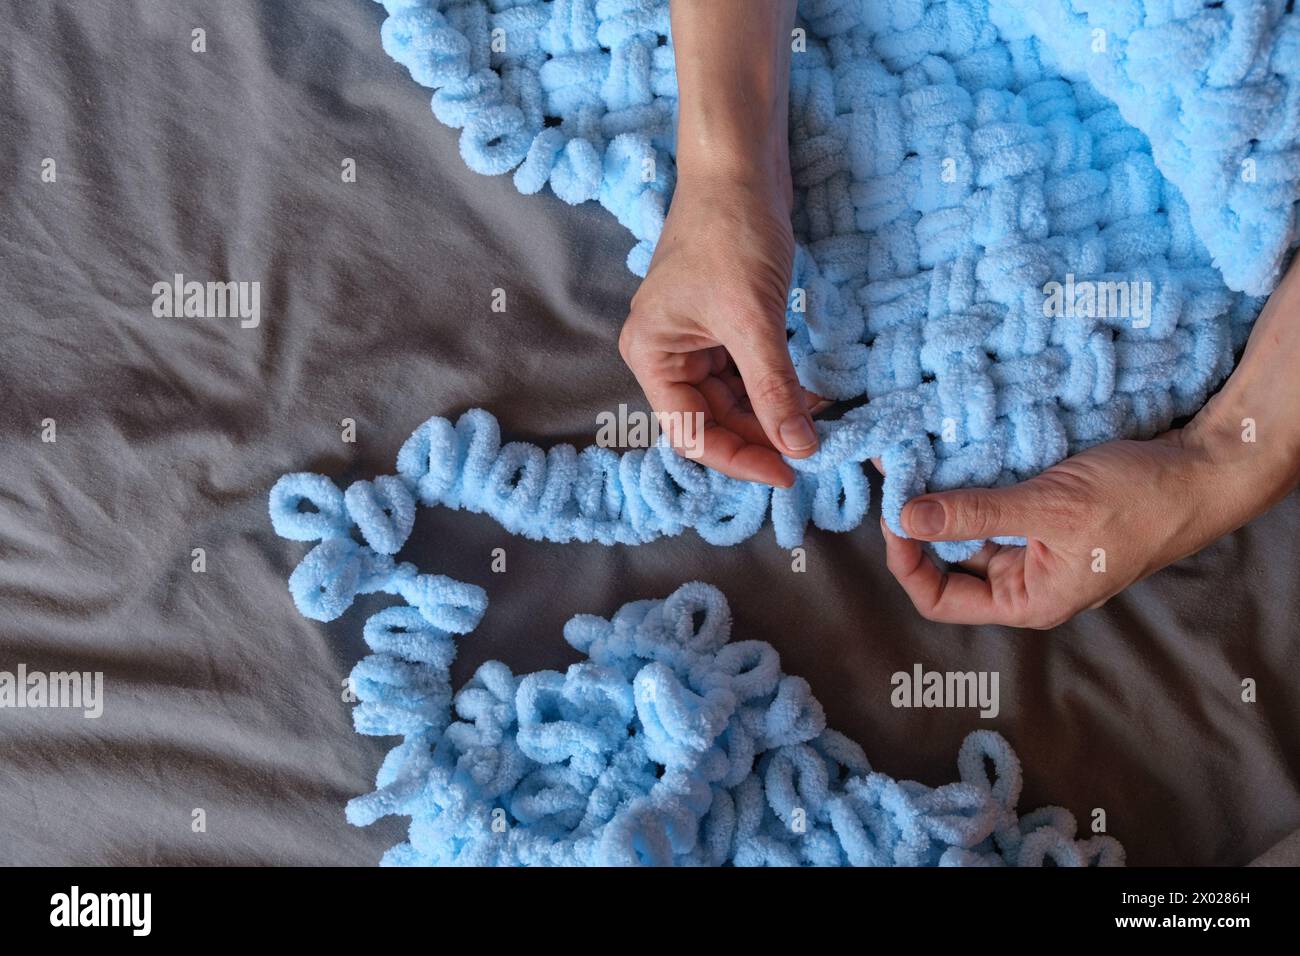 A woman lovingly crafts a blue blanket for her grandson with her own hands, each stitch a testament to her care and devotion. Create cherished memorie Stock Photo